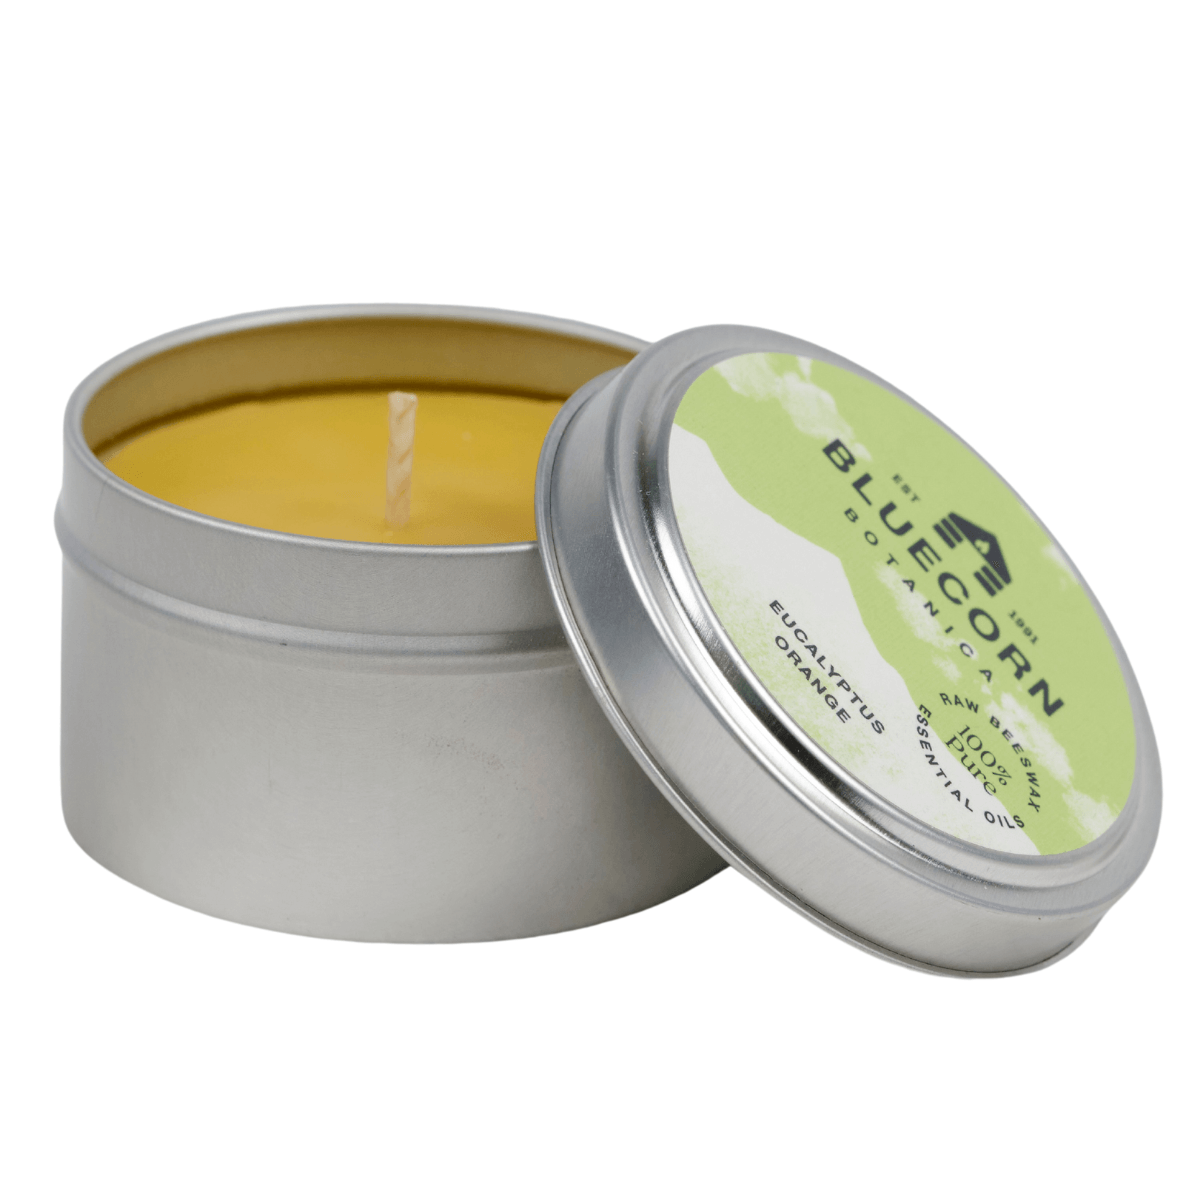 Bluecorn Botanica Eucalyptus & Orange 100% Pure Beeswax Travel Tin Candle. Burn Time: 6oz Candle: 30 Hours. 2oz Candle 12 Hours. Made with 100% Pure Beeswax and 100% Pure Essential Oils. Made with 100% pure cotton wick, no lead and paraffin free. Clean burning and non-toxic. Features Bluecorn Botanica Label in recyclable aluminum tin. Perfect for travel, camping and gifts. 